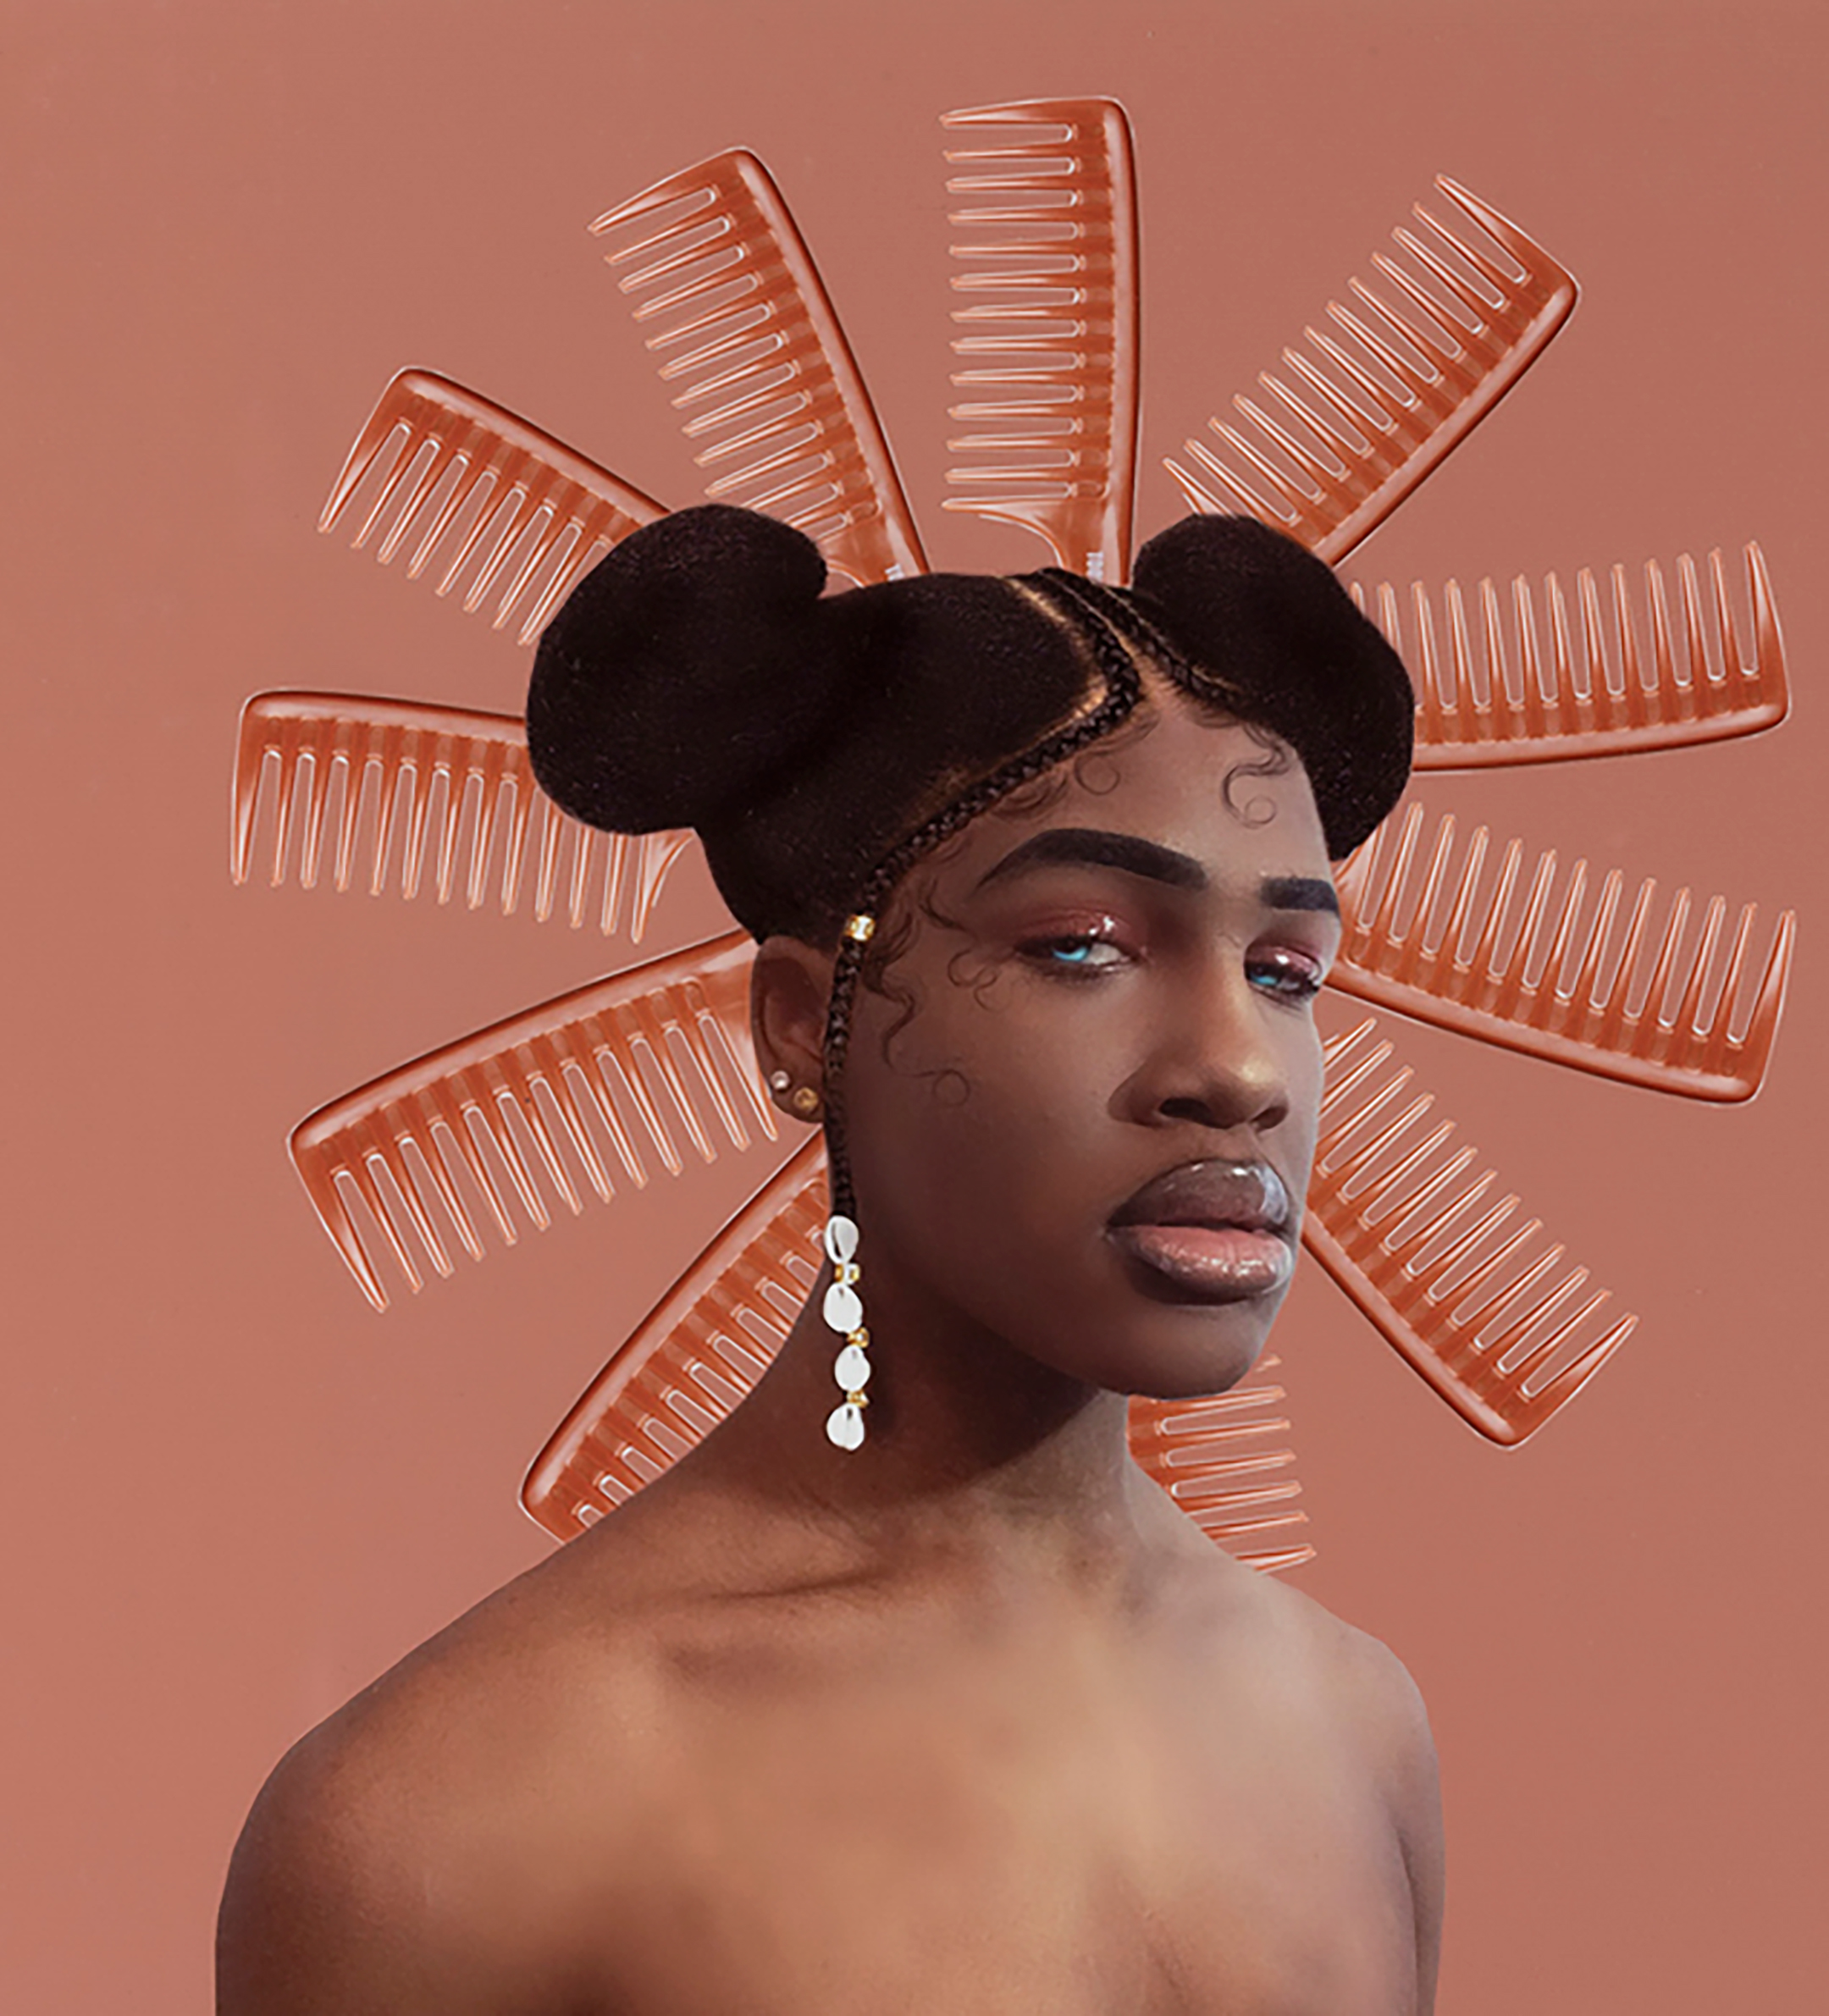 a piece of art featuring a young african american man without a shirt, on a pink background, his hair up in two buns on either side of his head, hair parted in the middle, with a halo of 11 redish combs behind his head